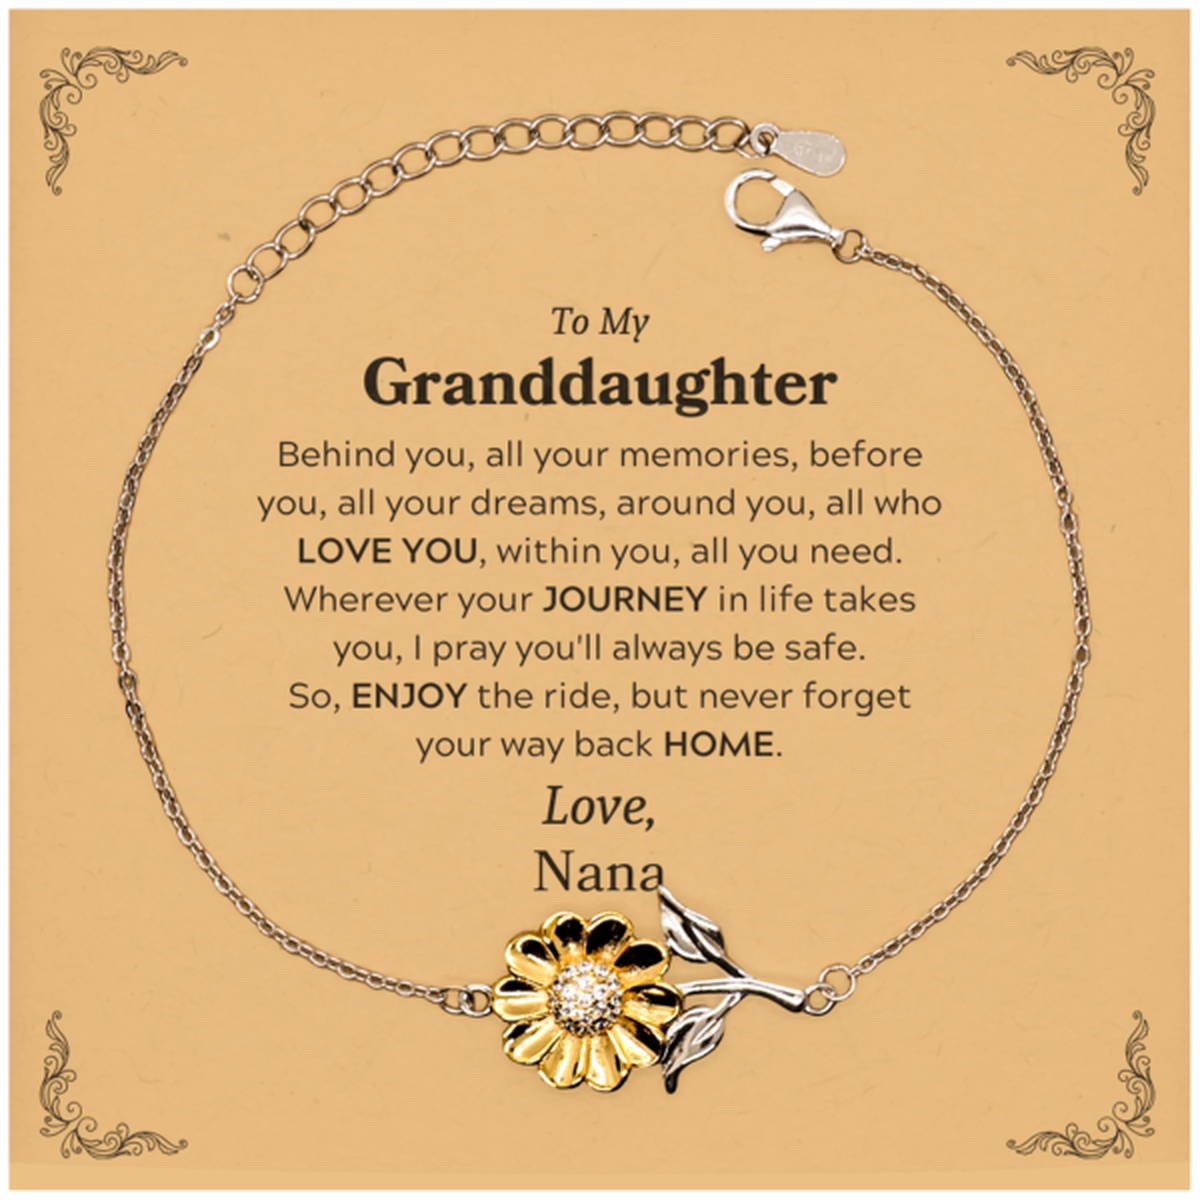 To My Granddaughter Graduation Gifts from Nana, Granddaughter Sunflower Bracelet Christmas Birthday Gifts for Granddaughter Behind you, all your memories, before you, all your dreams. Love, Nana